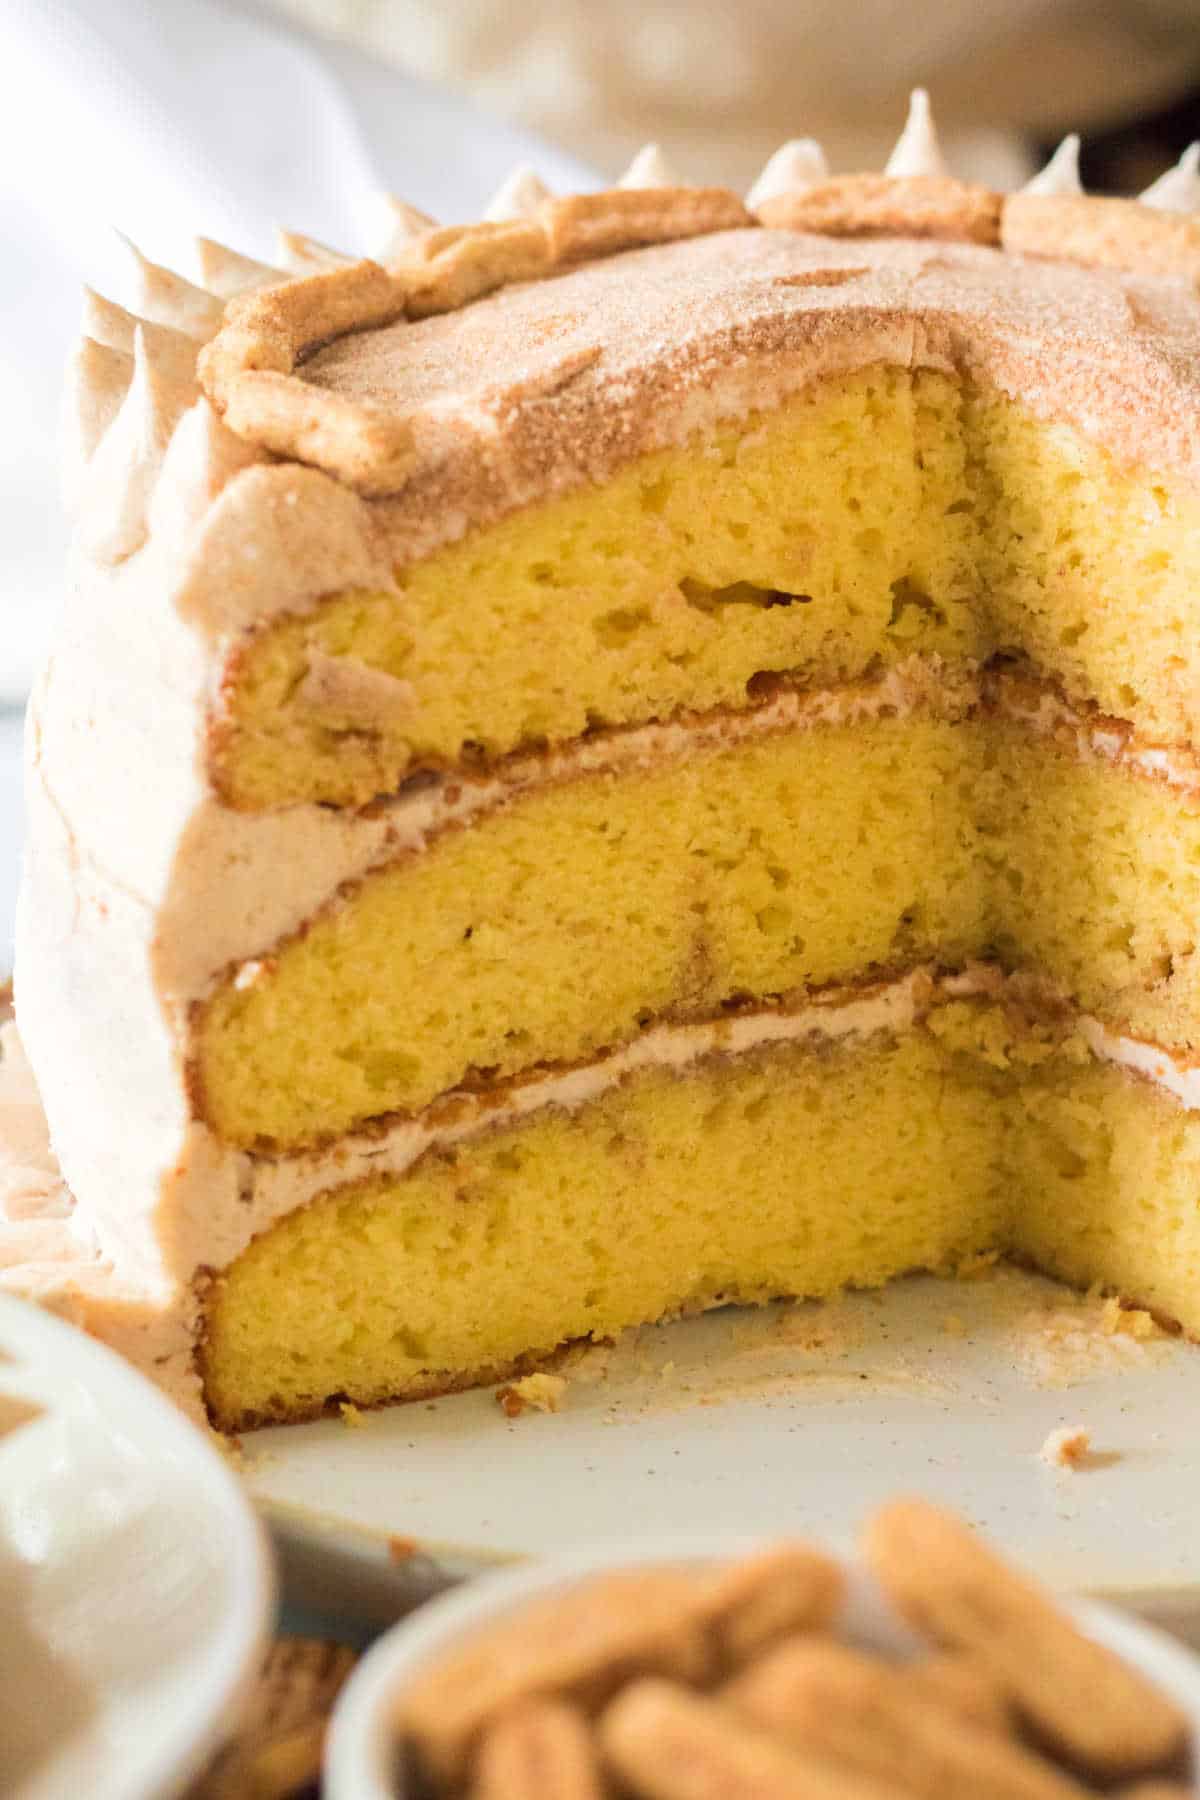 A snickerdoodle cake with pieces cut out of it.